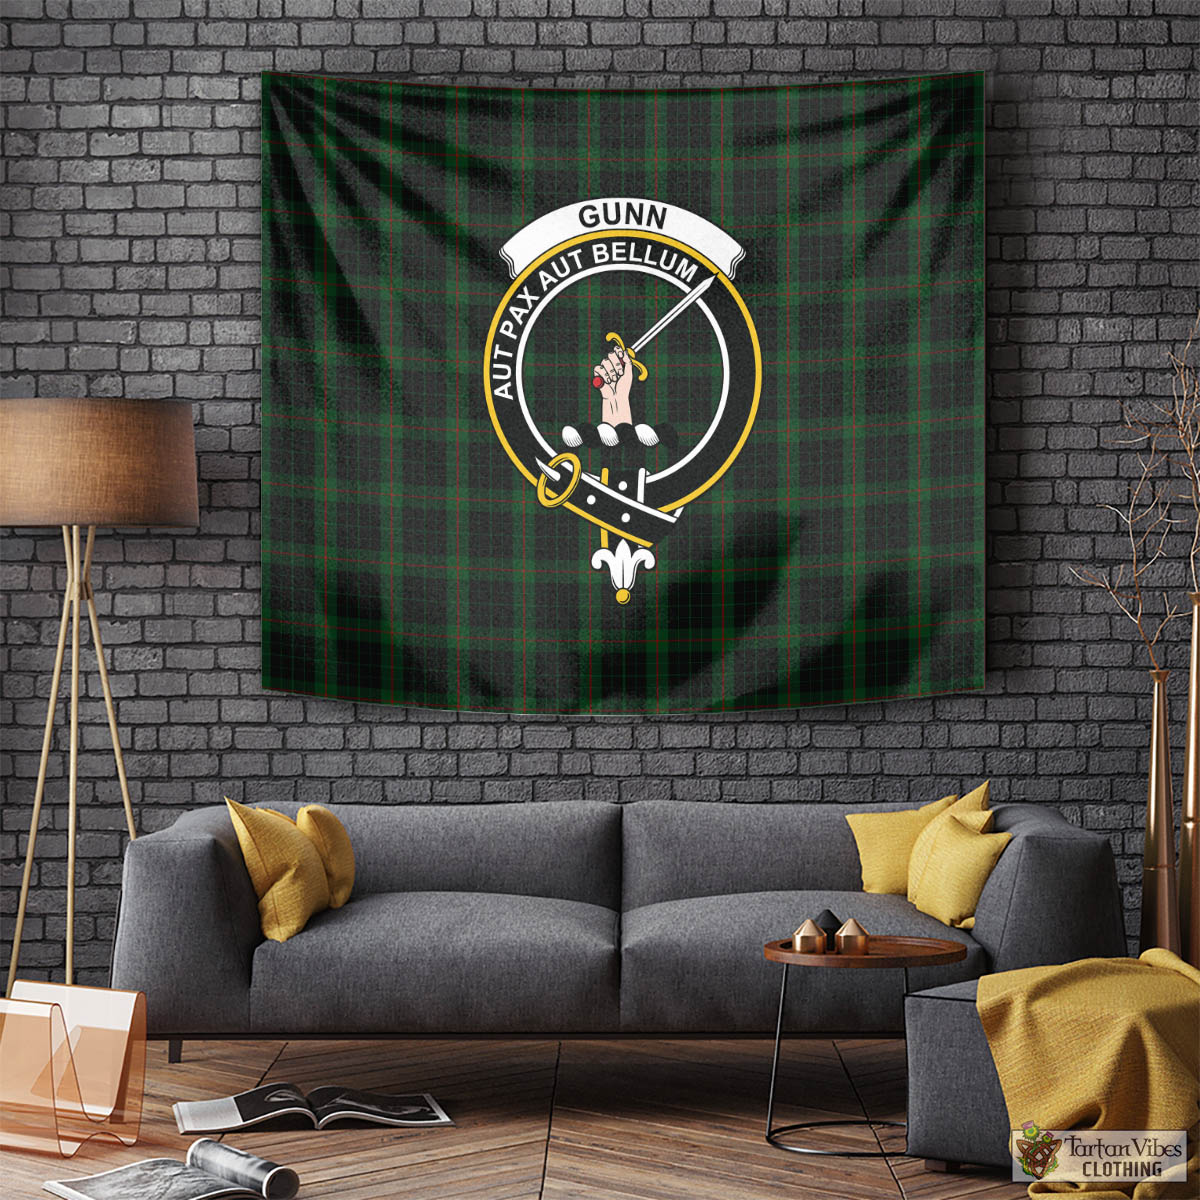 Tartan Vibes Clothing Gunn Logan Tartan Tapestry Wall Hanging and Home Decor for Room with Family Crest